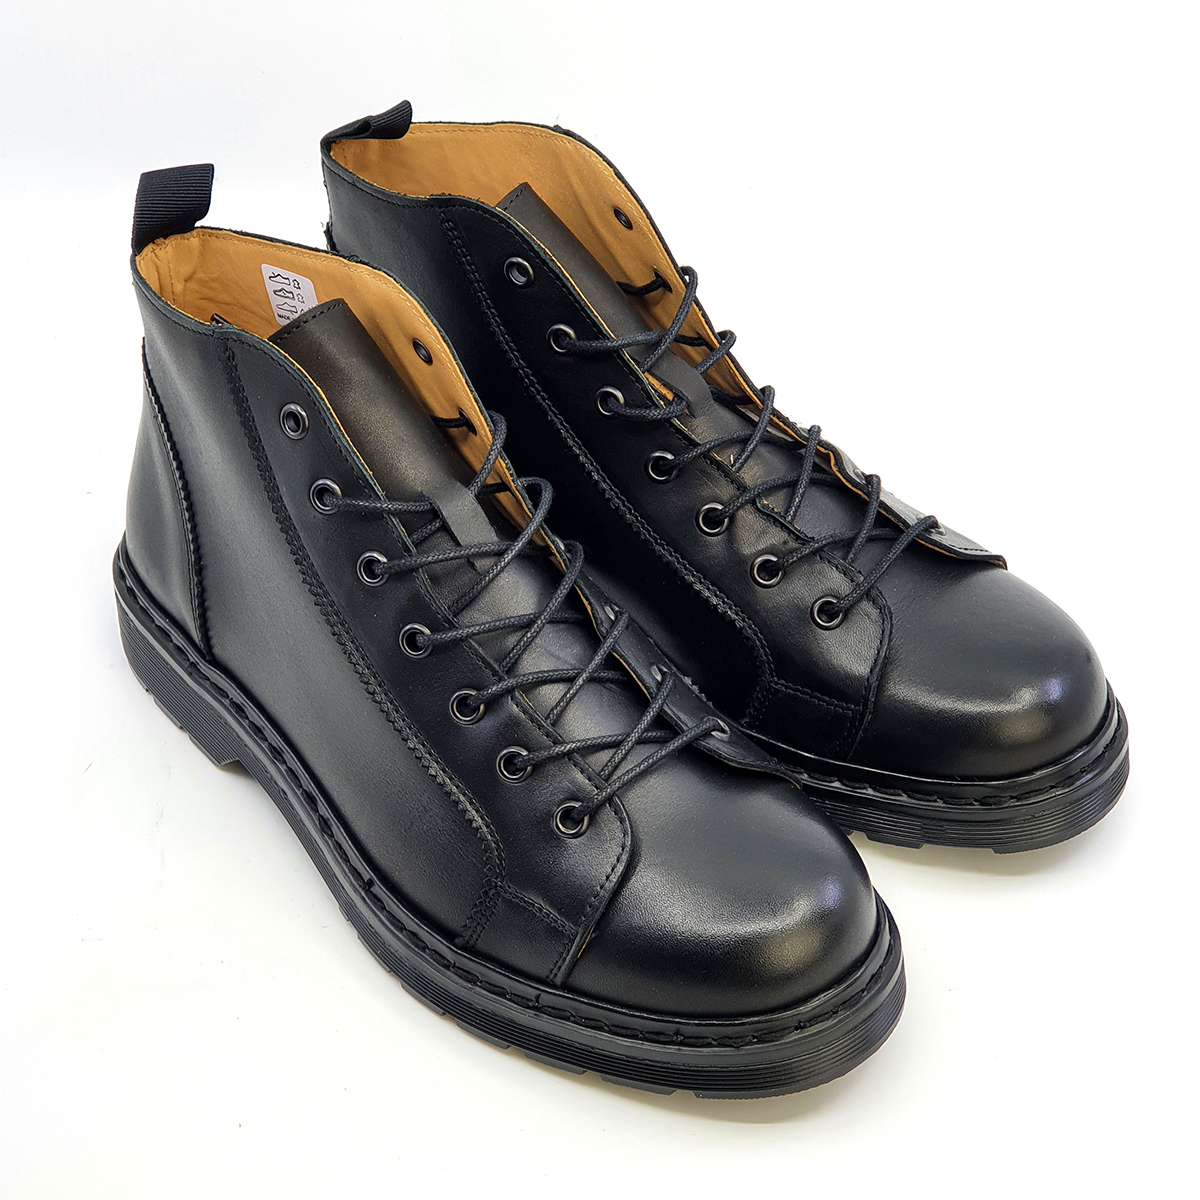 Grafters Mens Original Coated Leather Retro Monkey Boots | Discounts on  great Brands